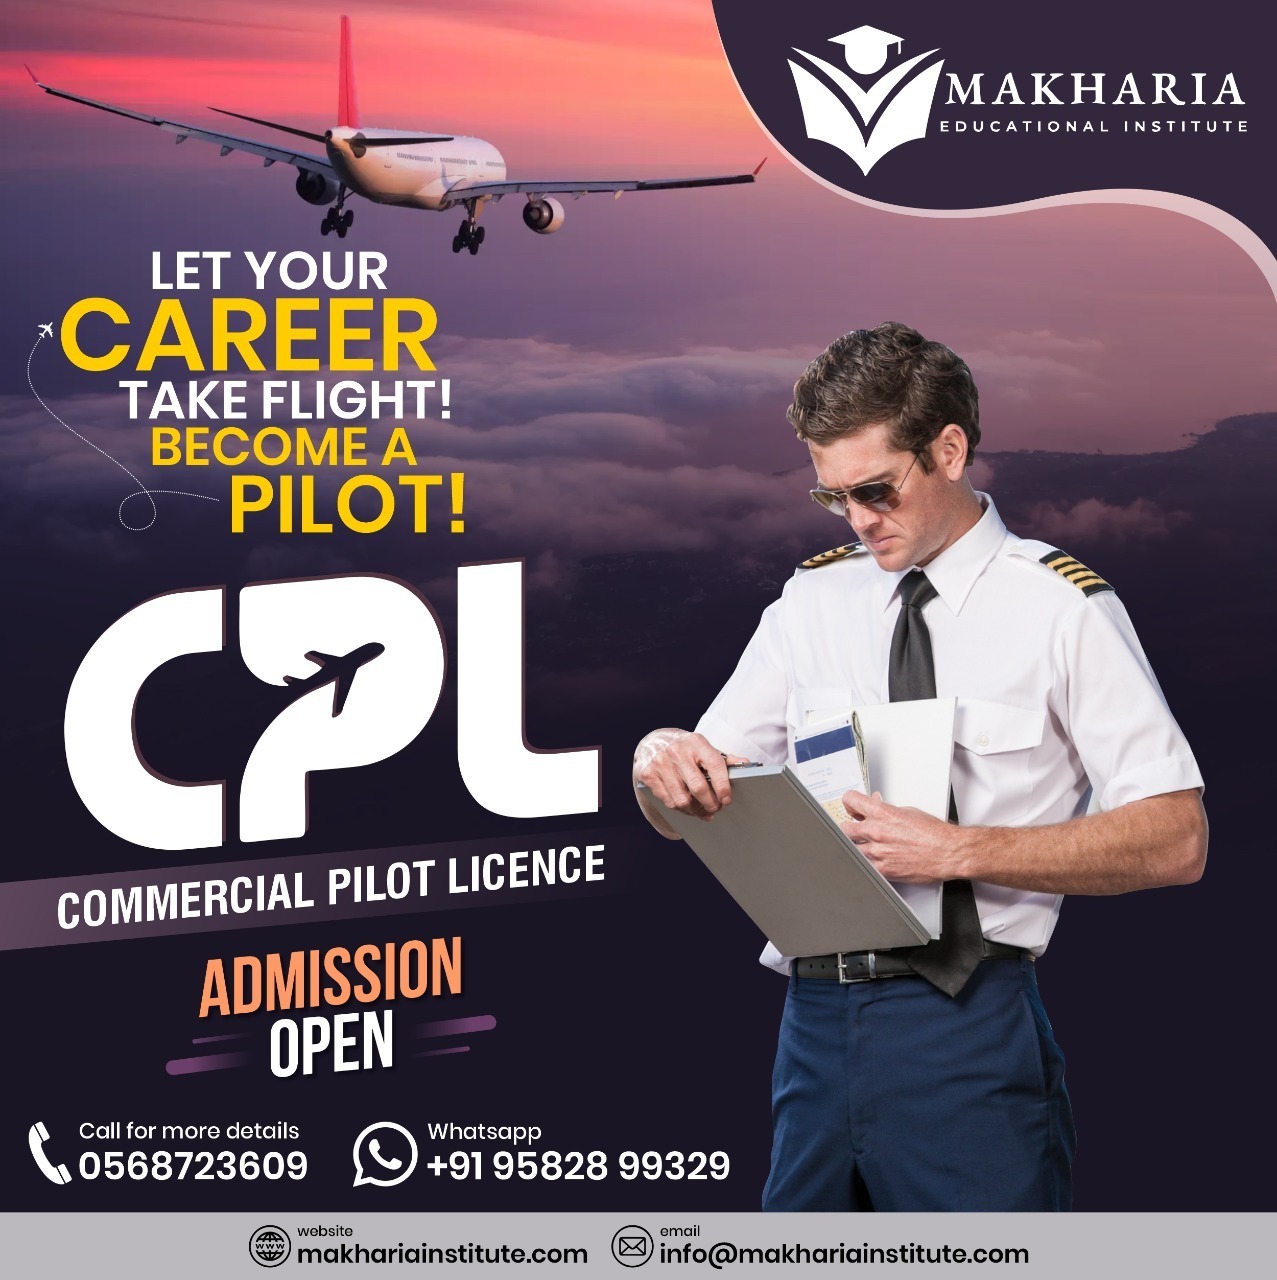 (CPL) Course” class with makharia call 0568723609